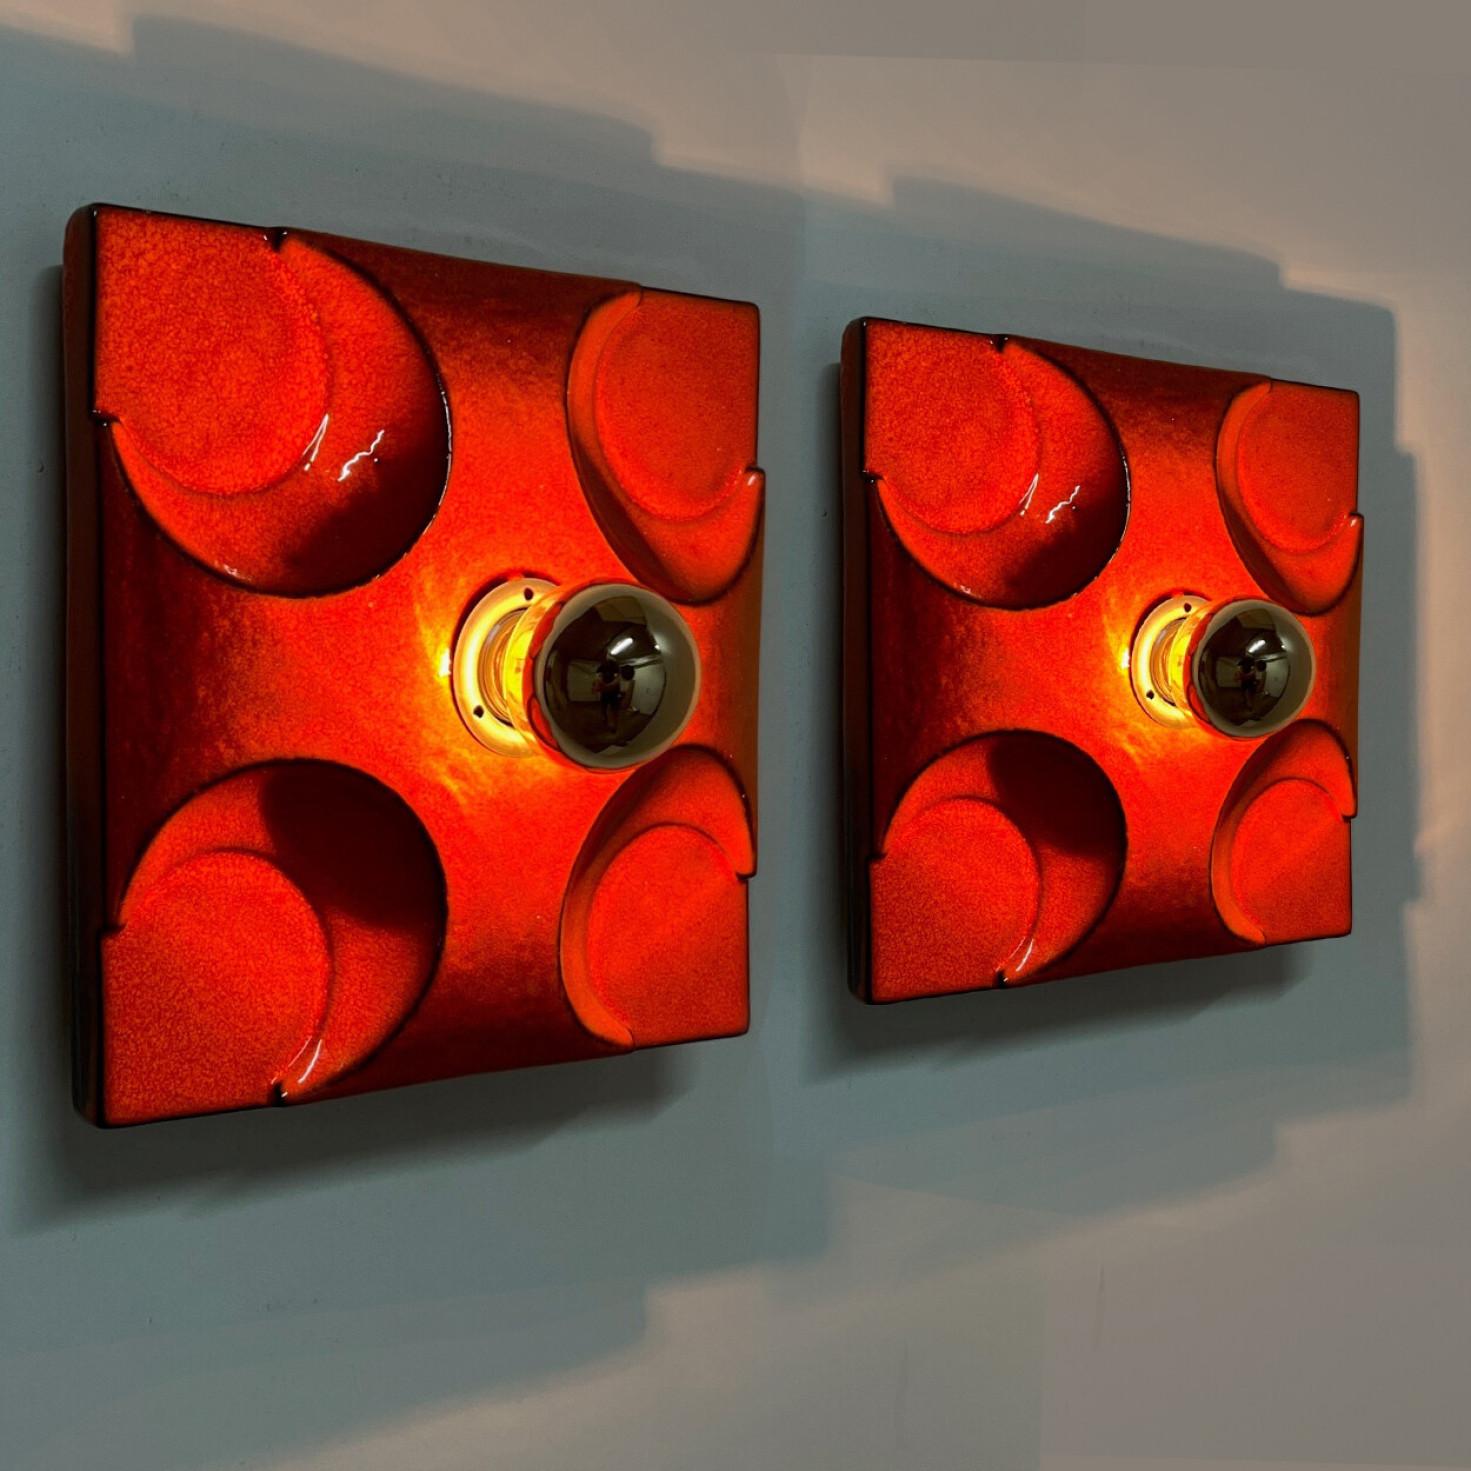 Glazed Pair of Orange Square Ceramic Wall Lights, Germany, 1970 For Sale